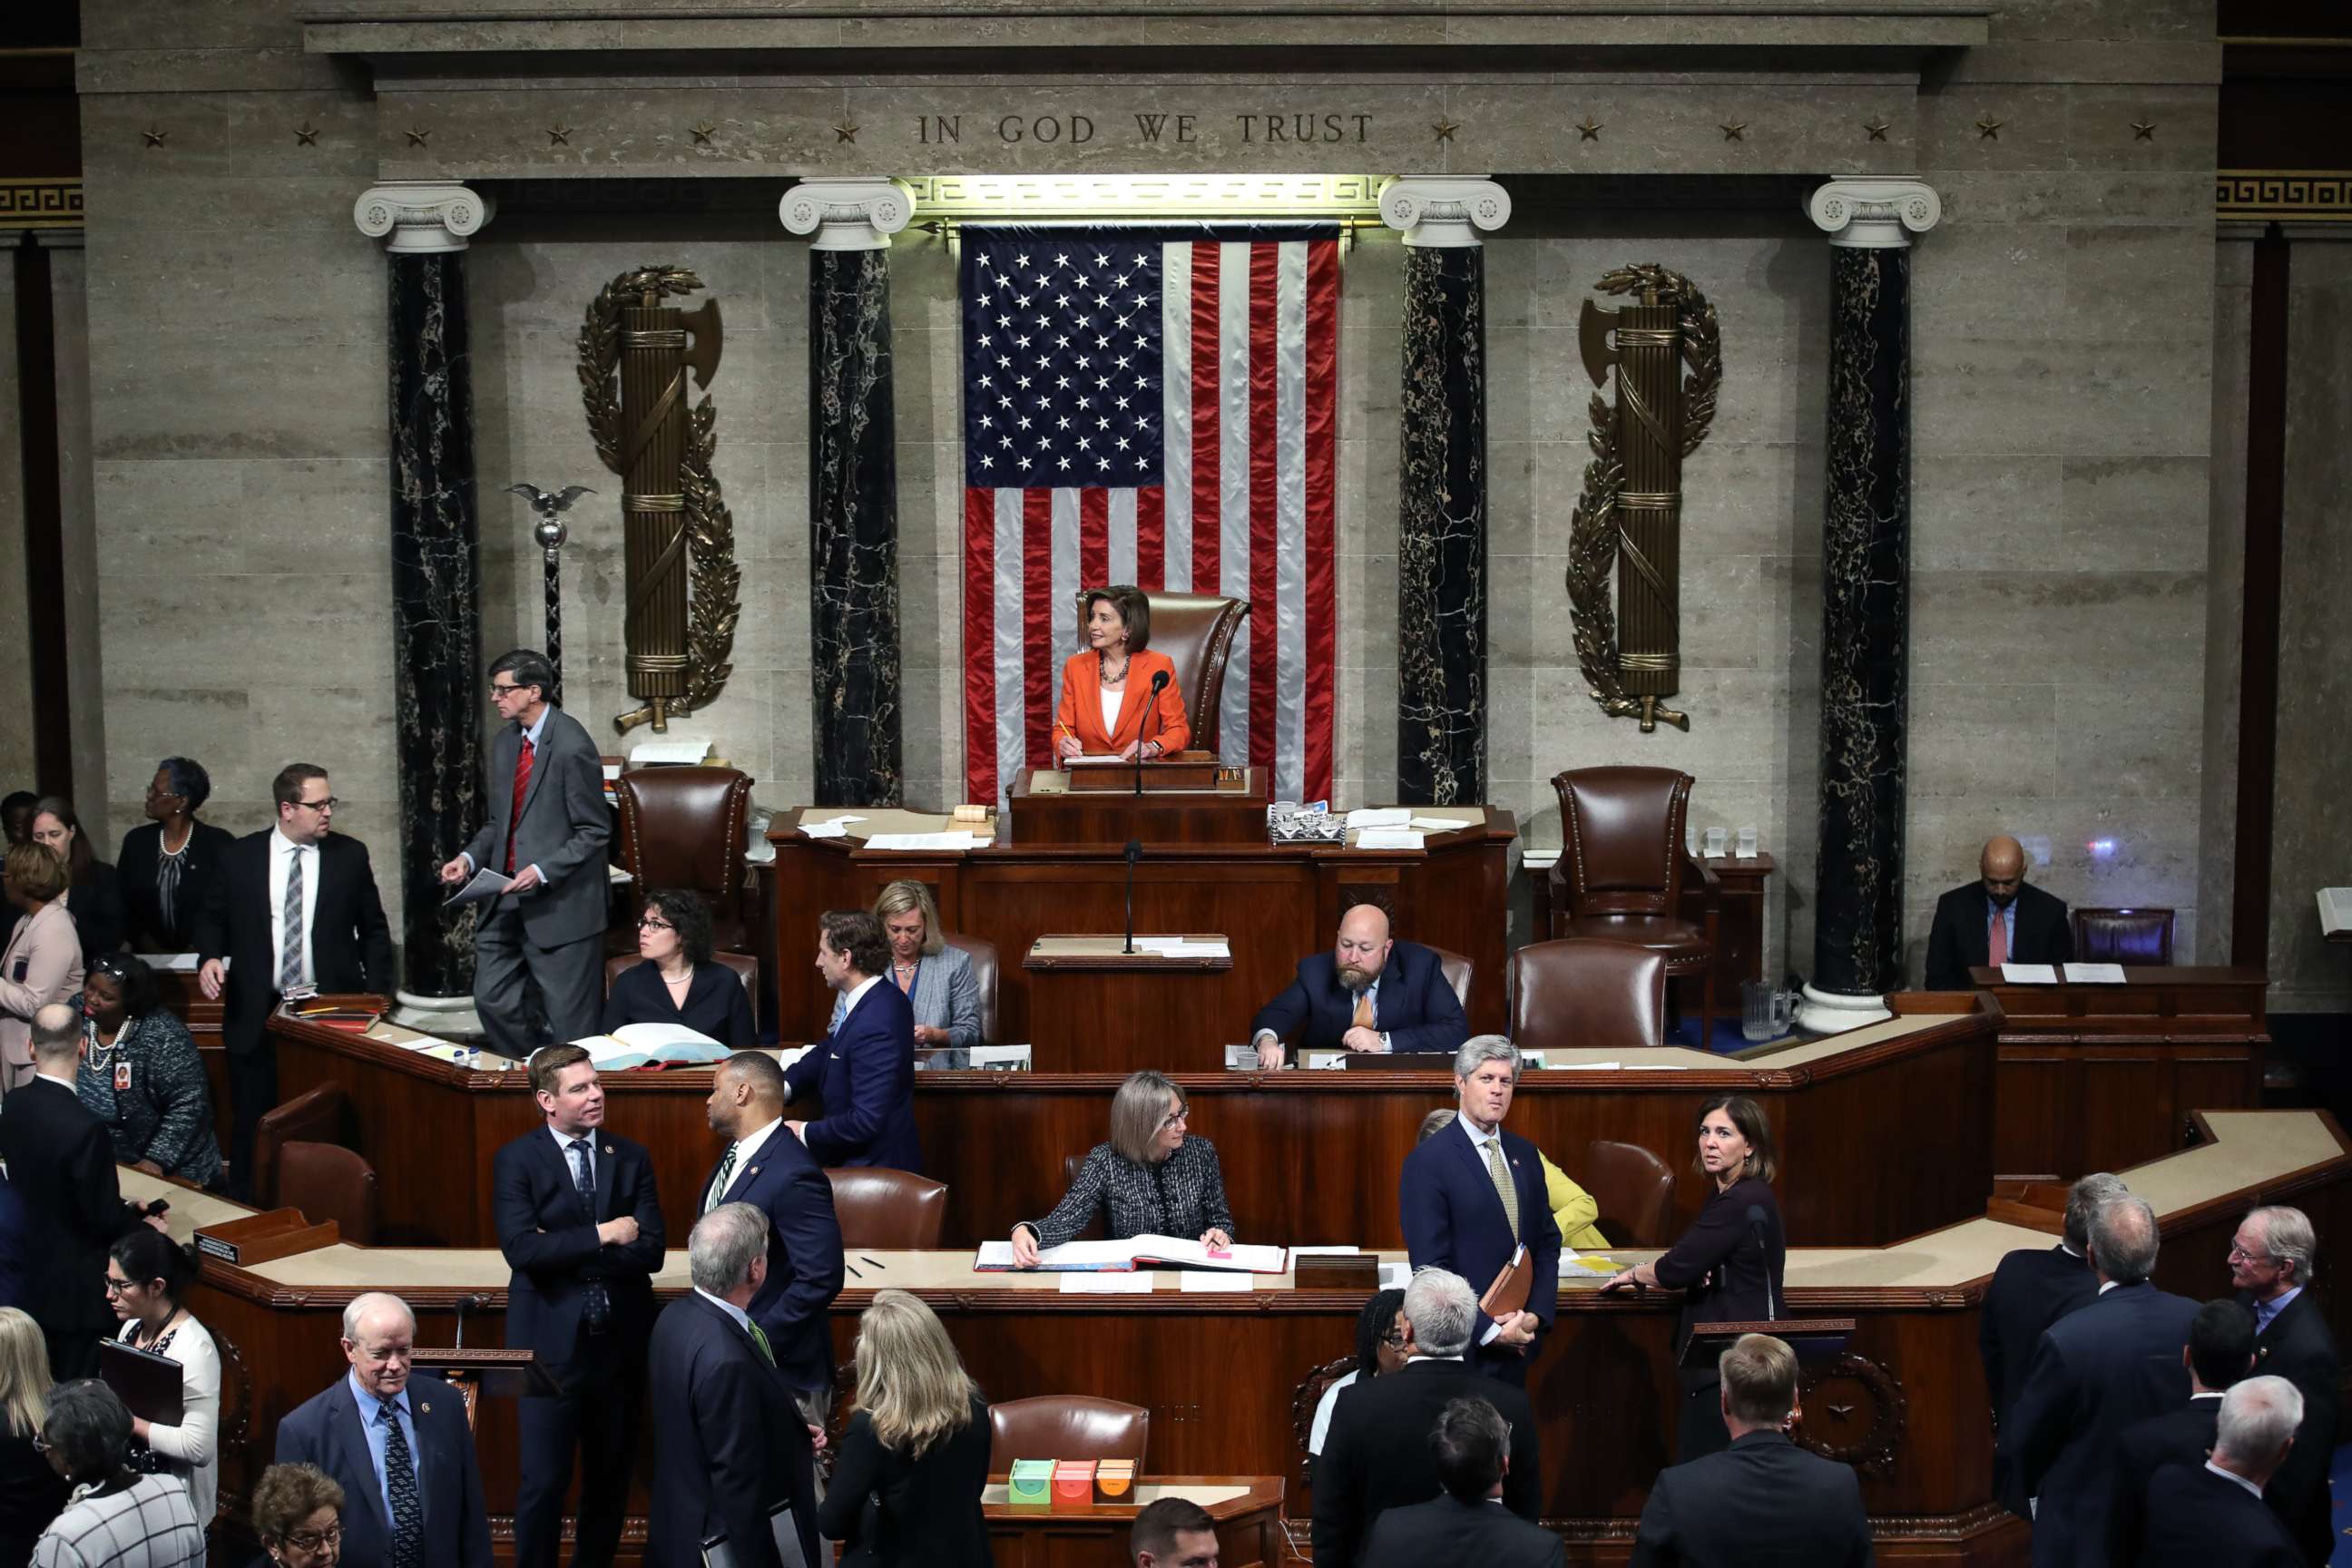 PHOTO: Speaker of the House, U.S. Rep. Nancy Pelosi presides over the U.S. House of Representatives as it votes on a resolution formalizing the impeachment inquiry centered on U.S. President Donald Trump in the House Chamber October 31, 2019.